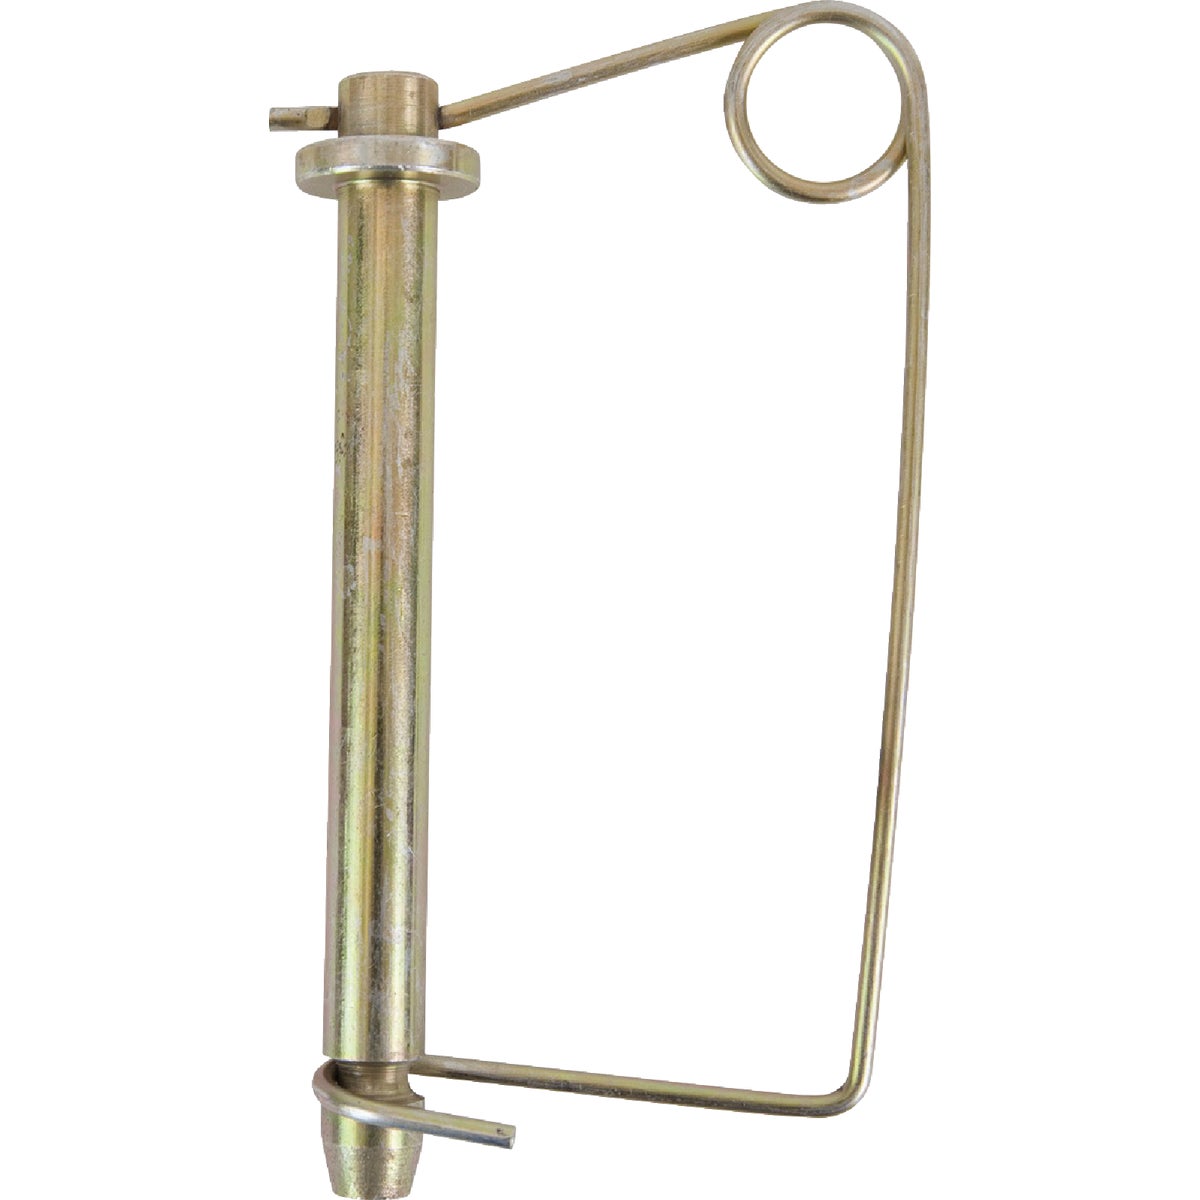 Item 716274, Yellow zinc plated hitch pin with spring wire swivel handle.